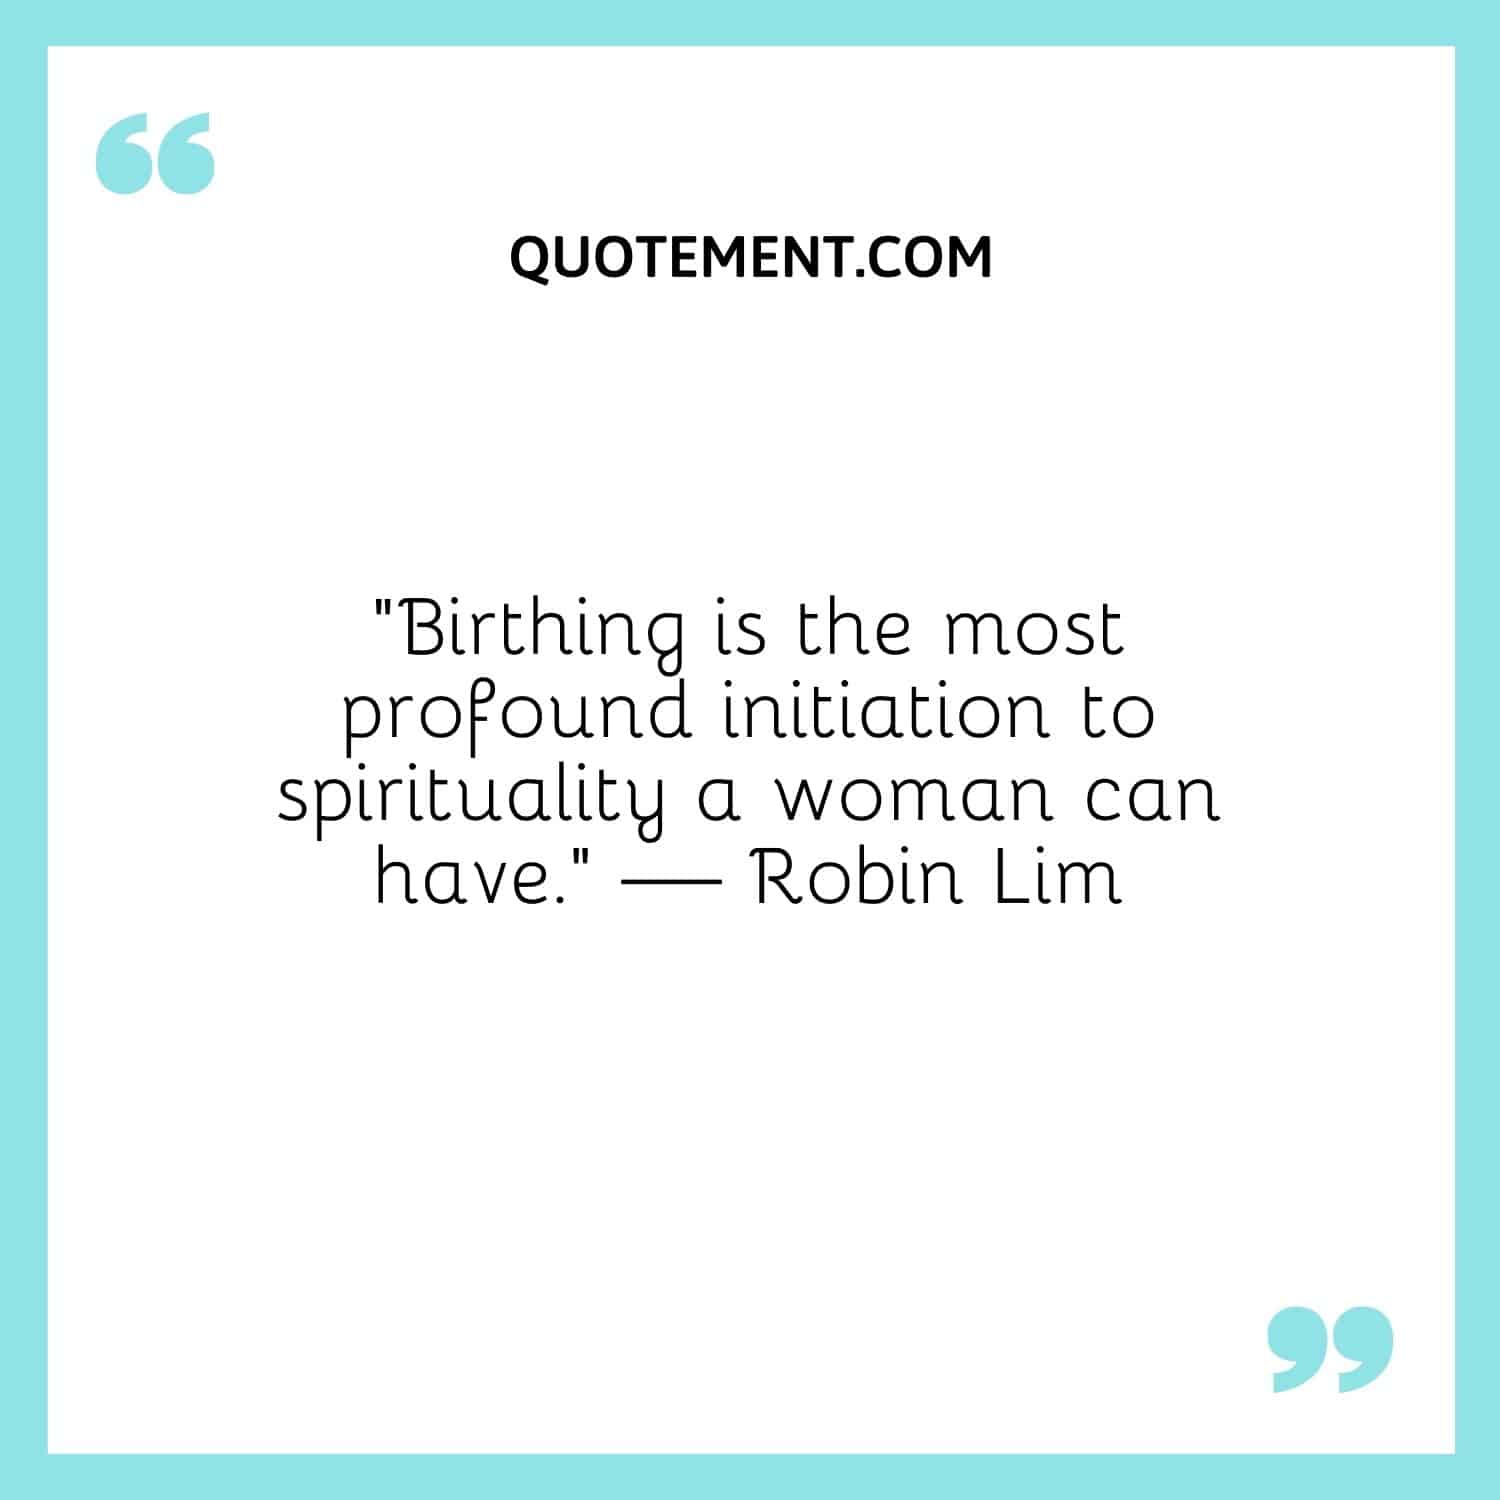 Birthing is the most profound initiation to spirituality a woman can have.